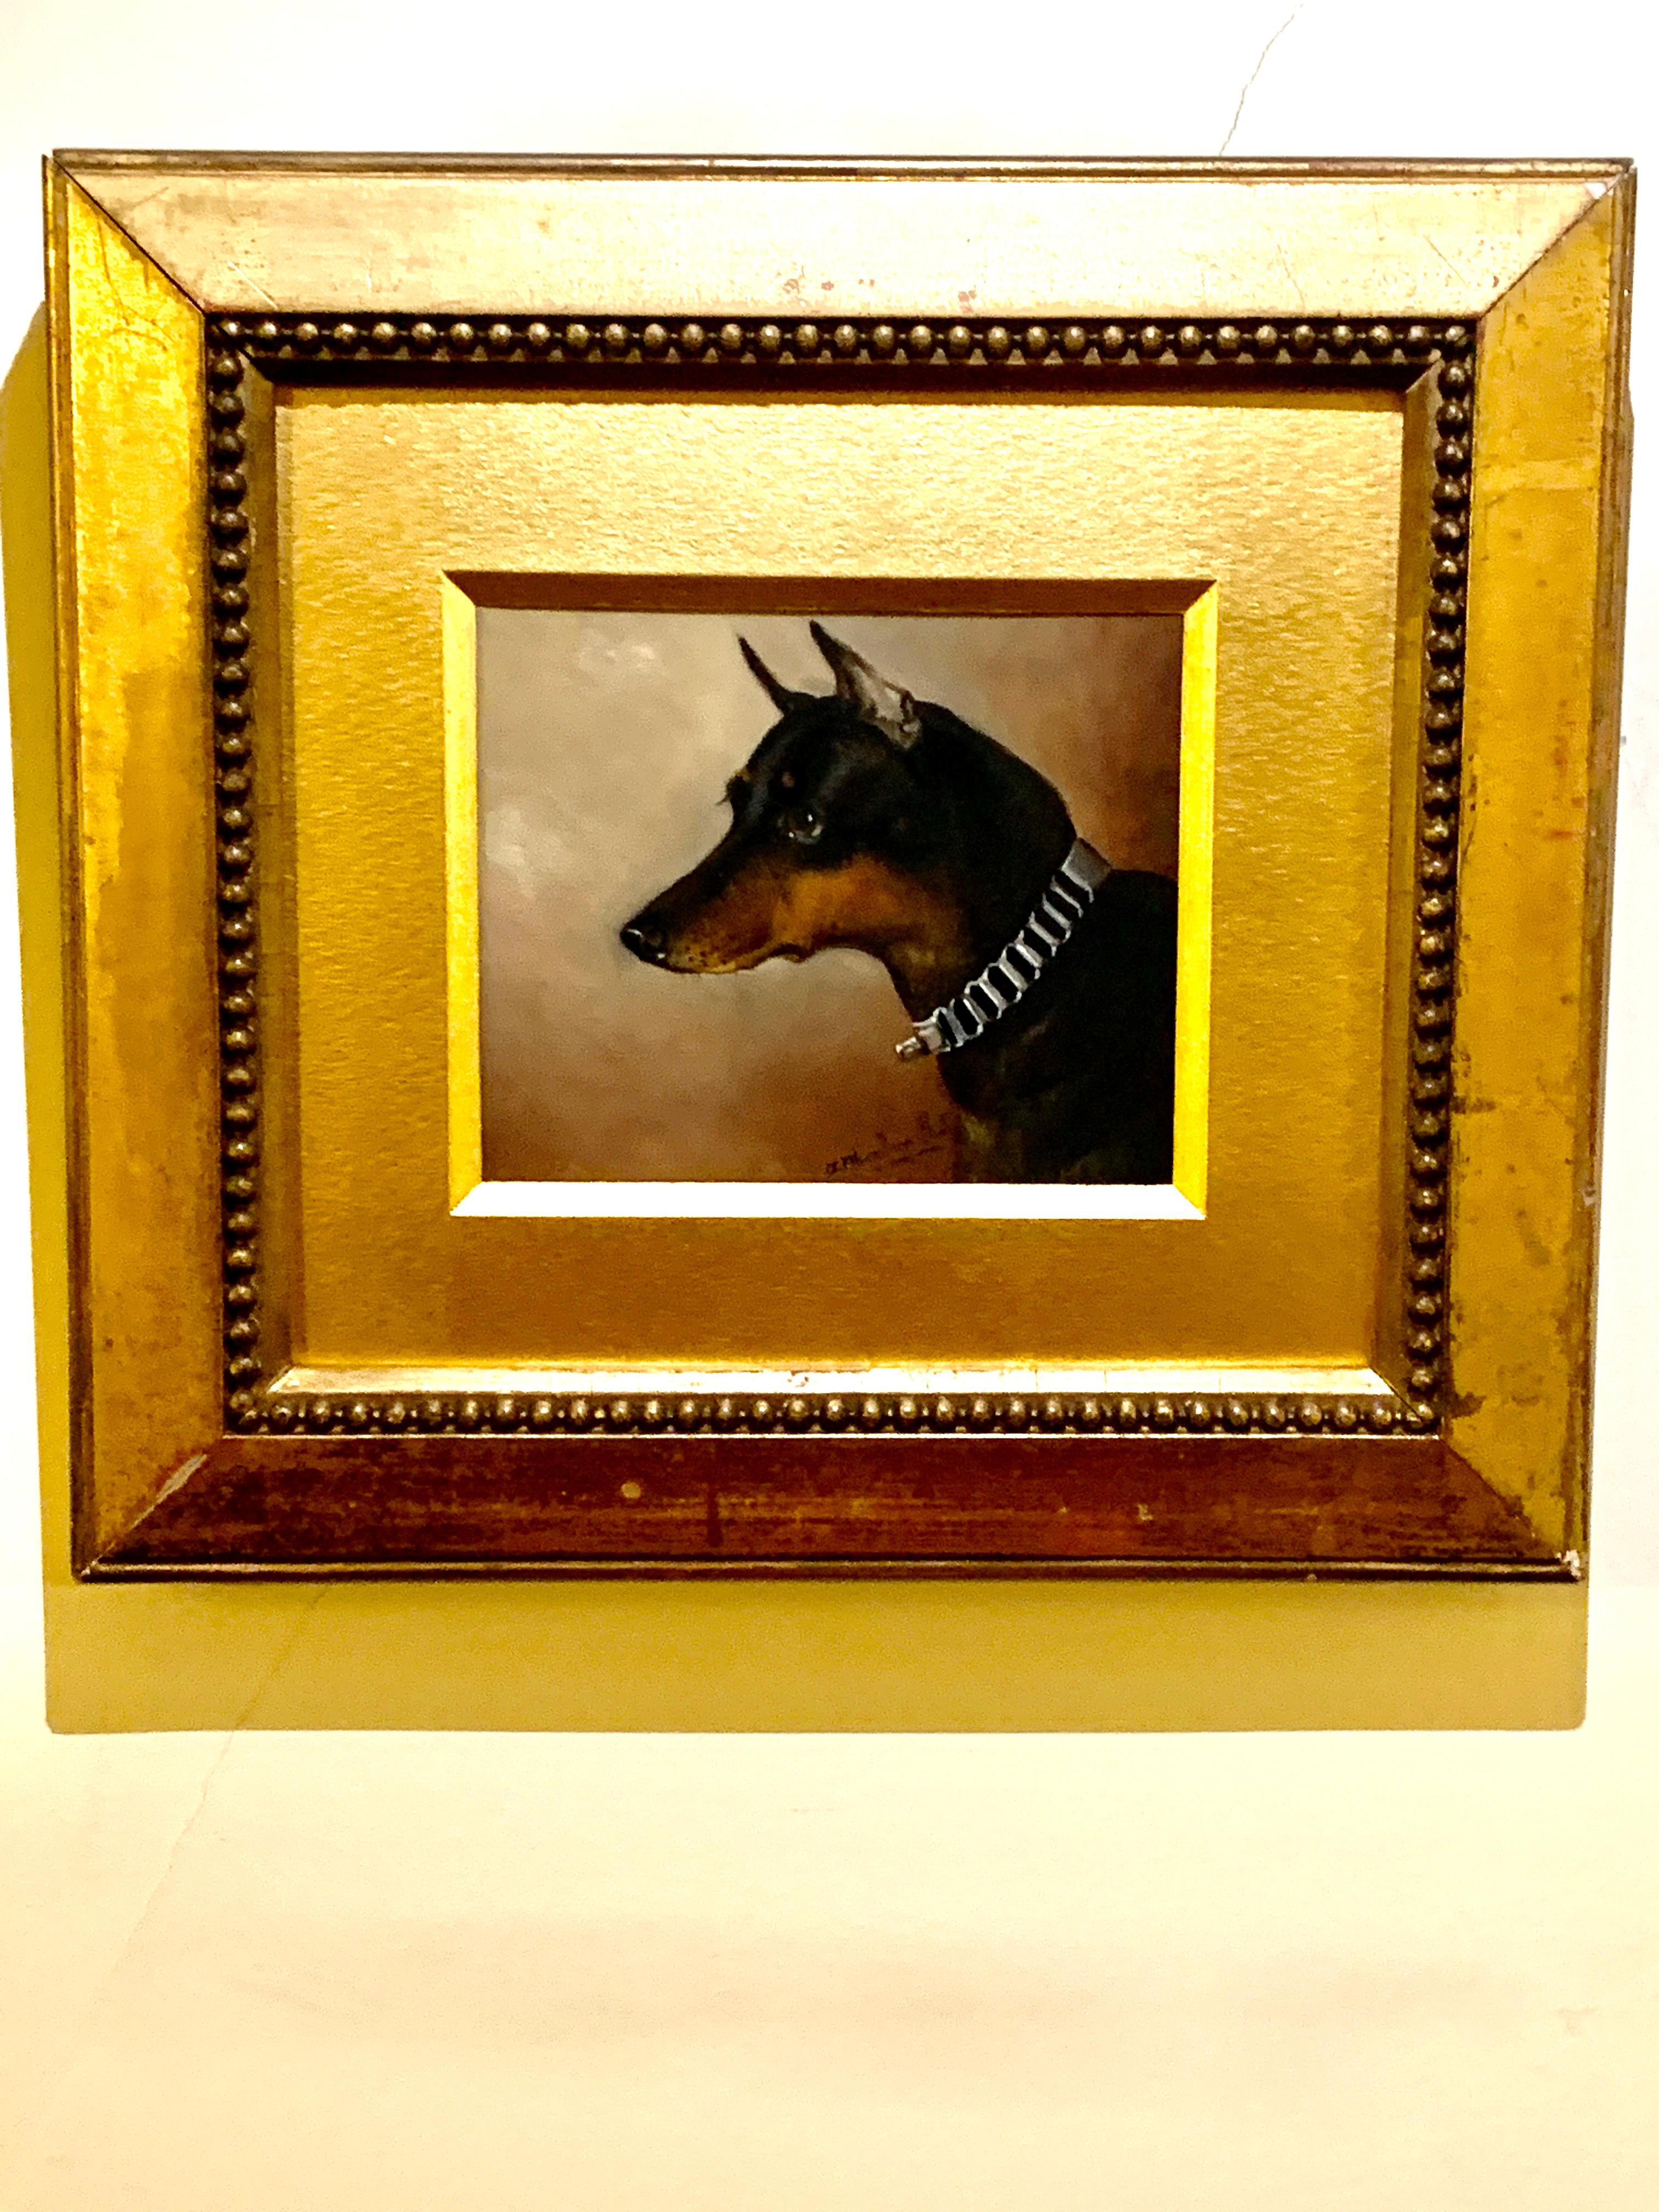 Victorian English 19th-century portrait of a Pinscher dog.

 Wheeler specialized in painting equestrian hunting scenes and sporting scenes.  Wheeler made a very lucrative living during his lifetime as a commissioned artist, painting the gentry’s